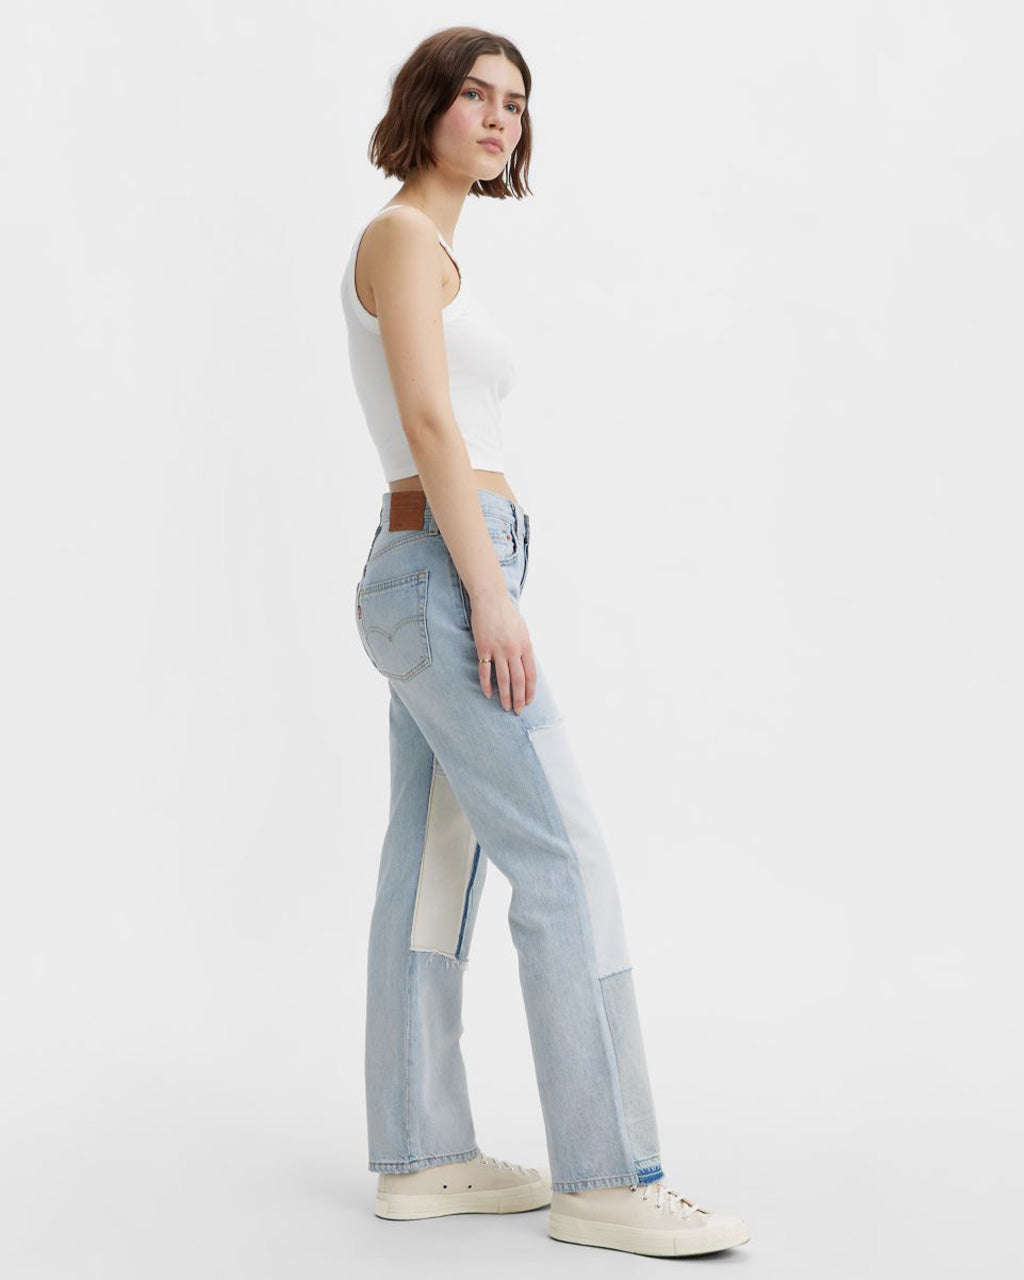 90's Freehand Folk Jeans - Serious Sizzle – ban.do